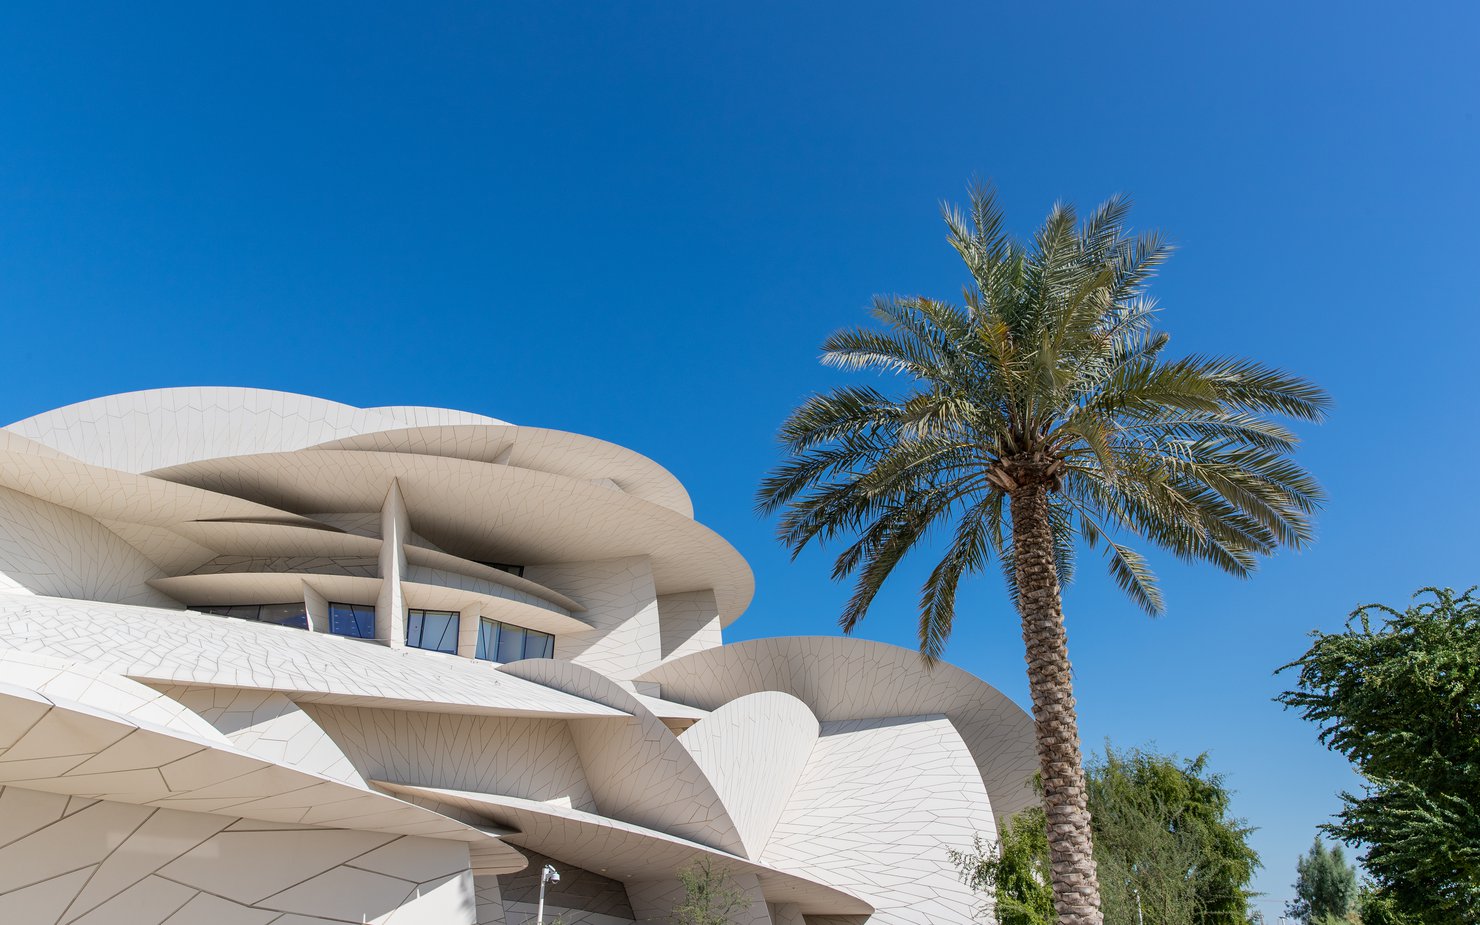 An exterior shot of the National Museum of Qatar and one of the surrounding palm trees